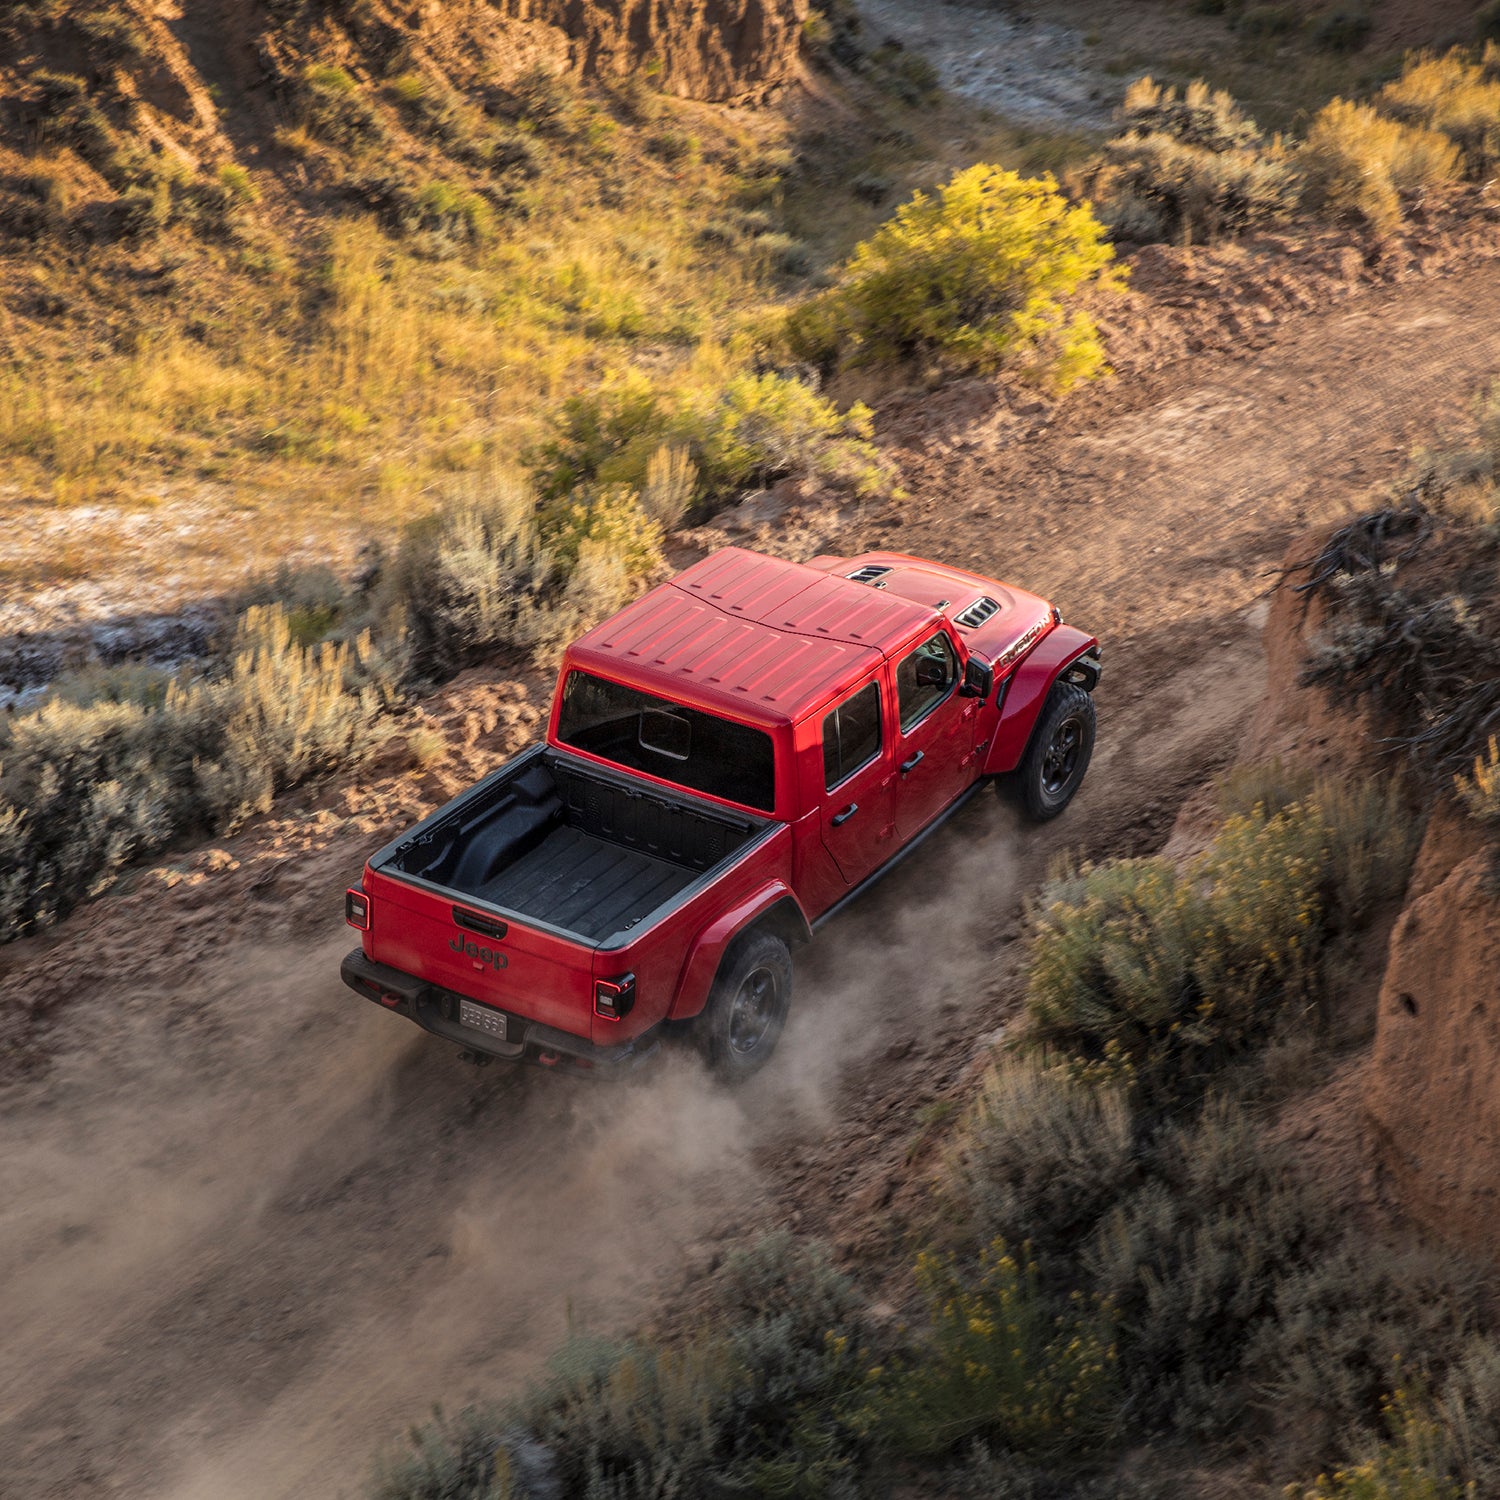 Can My Vehicle Make It?' A Guide to Off-Road Technical Trail